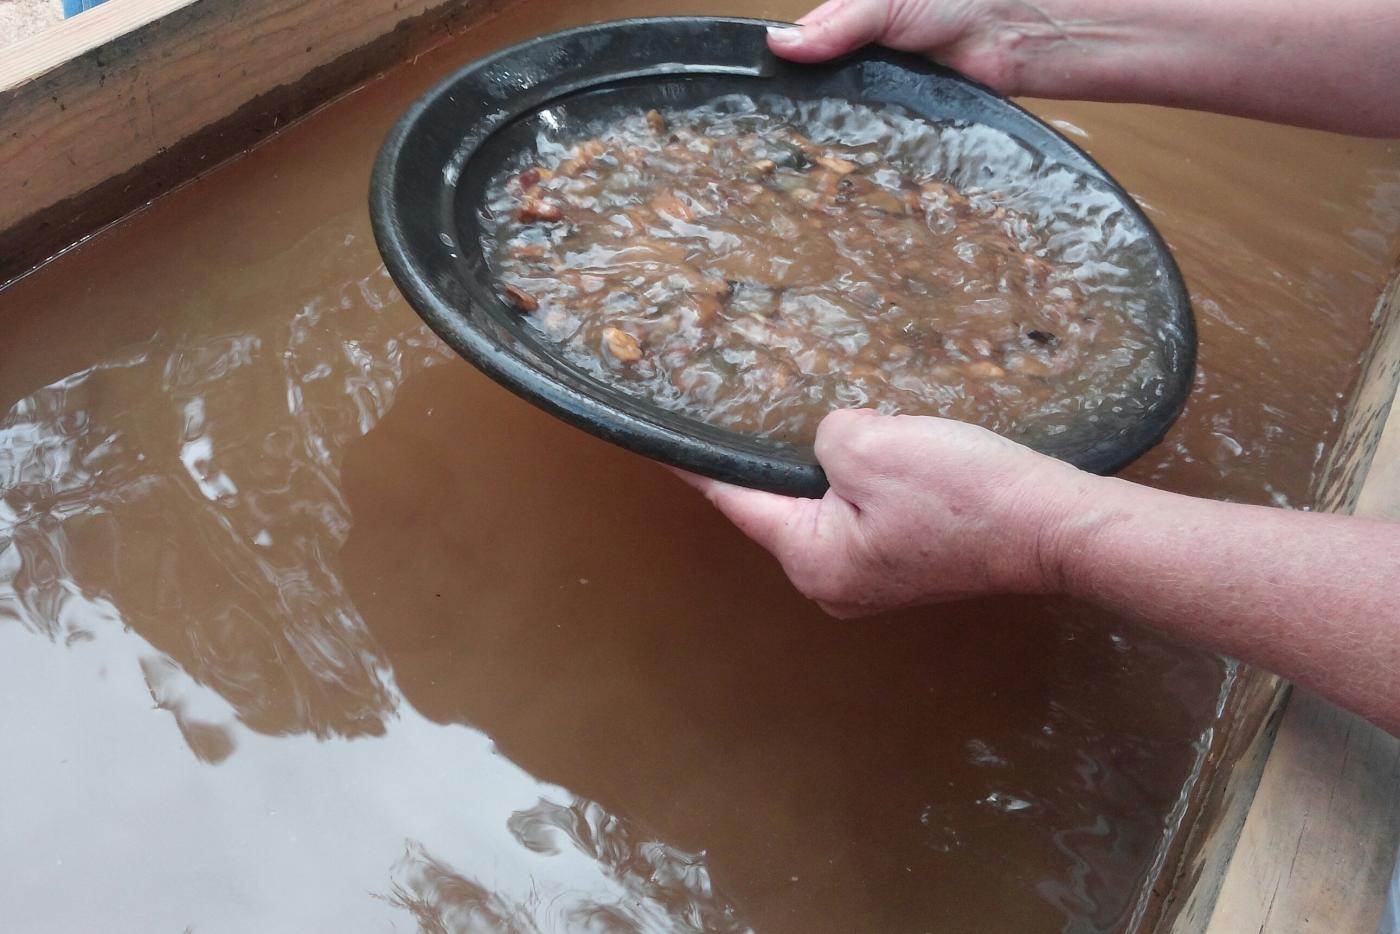 Holding pan full of dirt over water filled trough